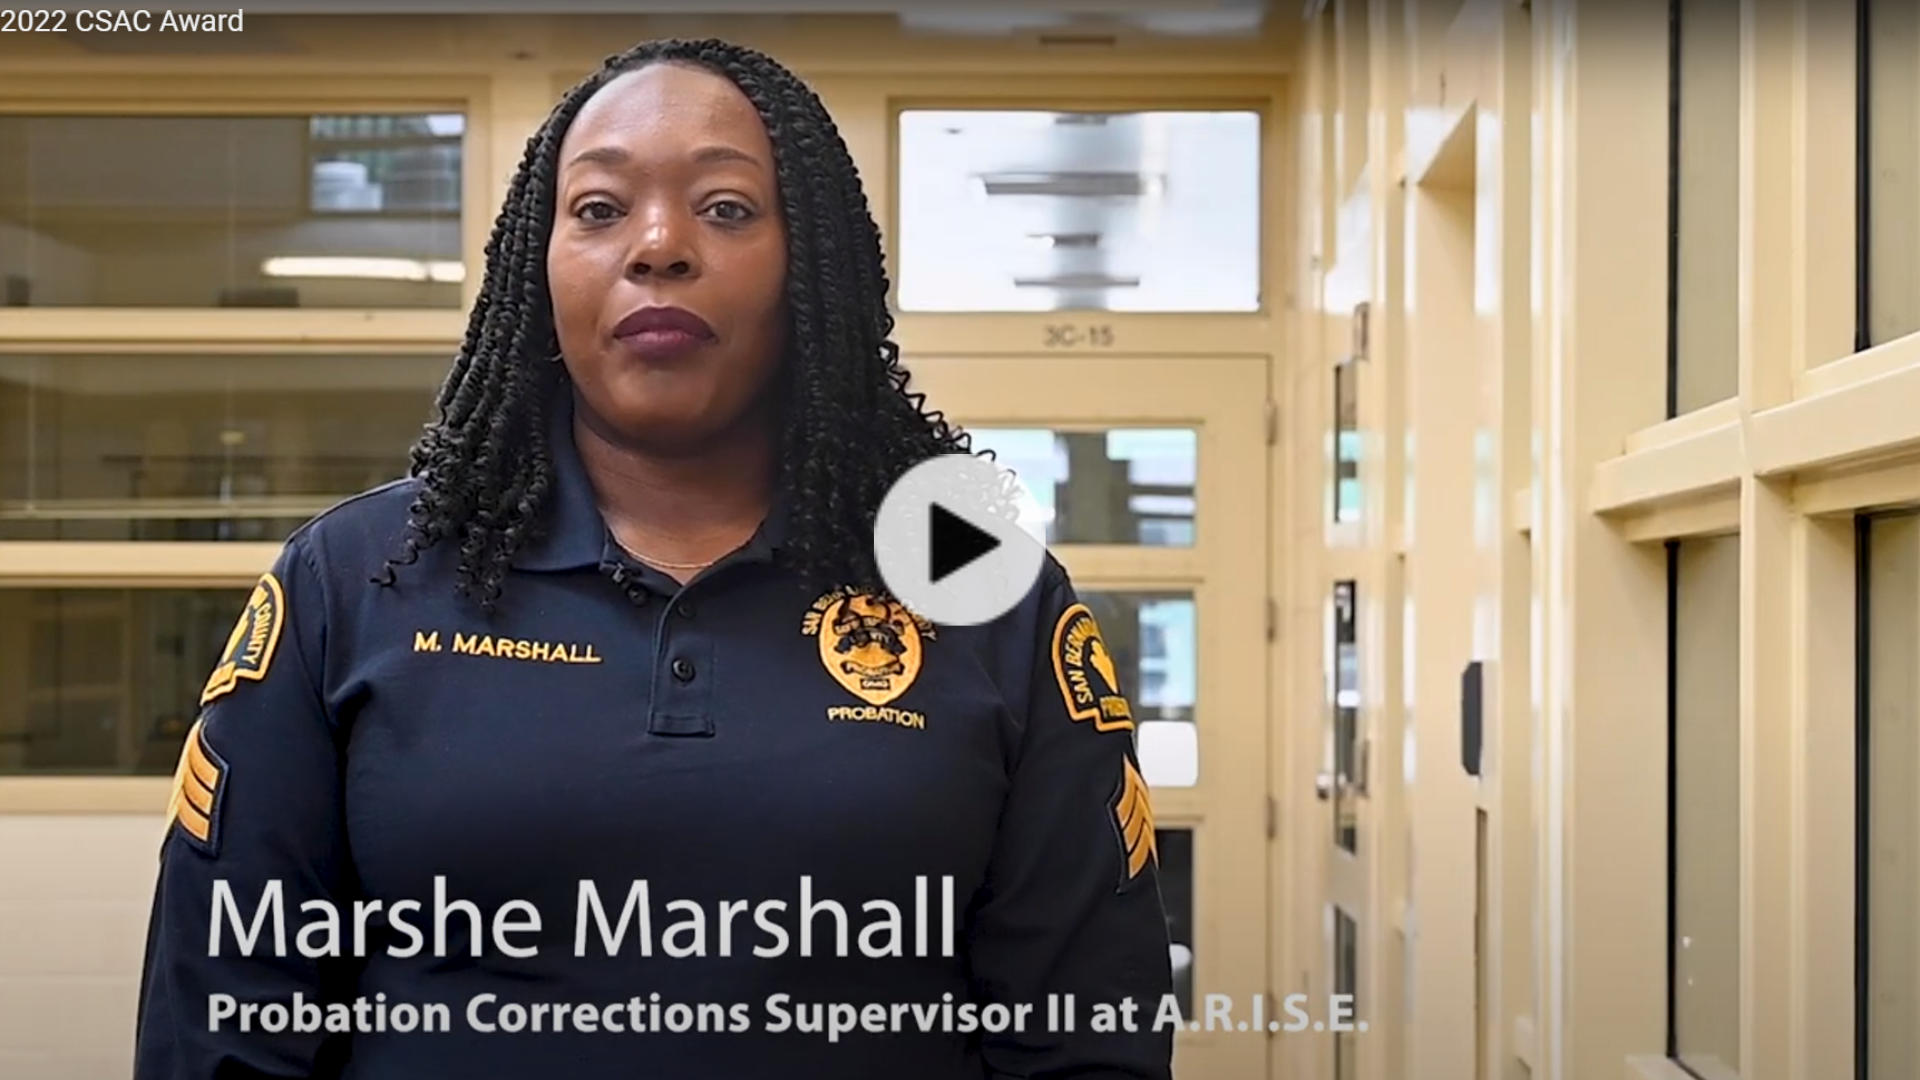 An African American female probation officer is pictured with the name Marshe Marshall with a video play button.